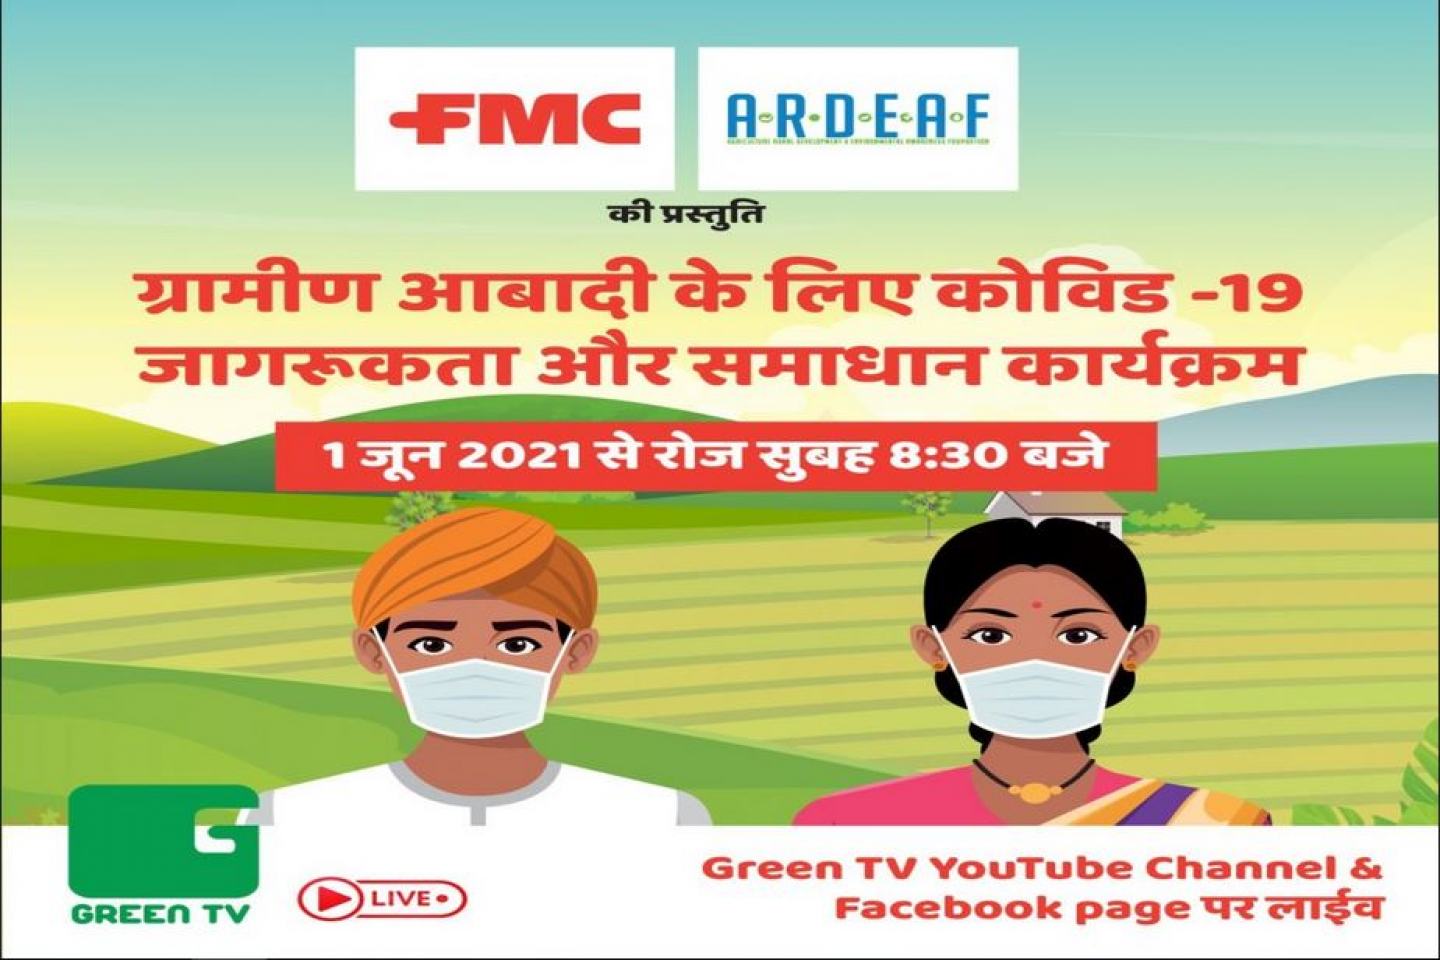 Covid Free Village initiative by FMC India in collaboration with ARDEA